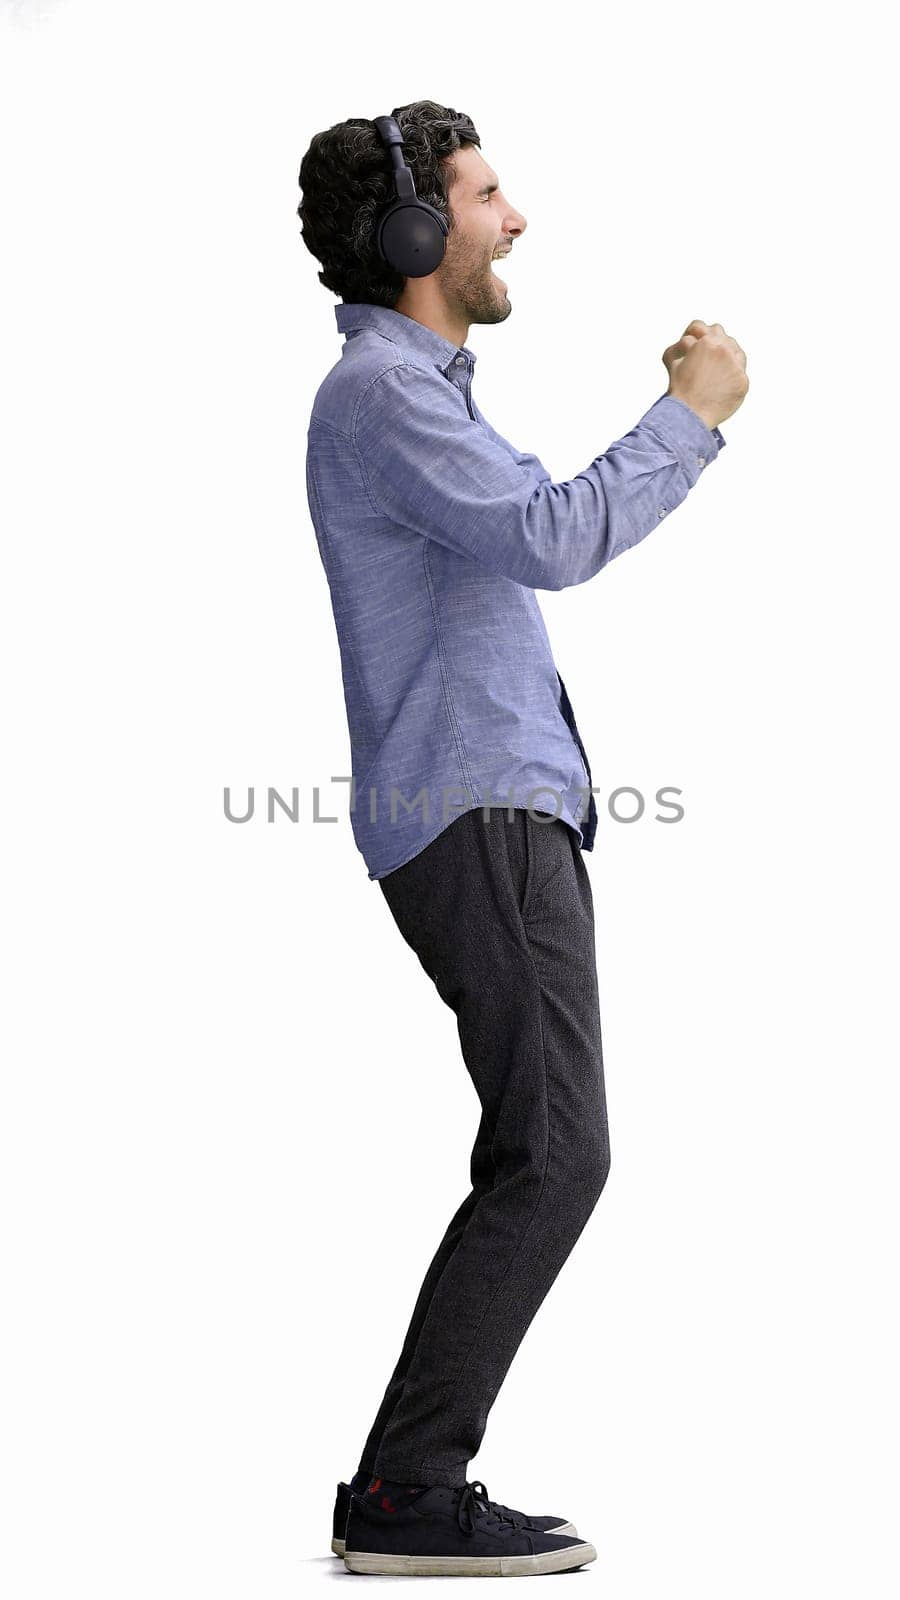 man in full growth. isolated on white background wearing headphones dancing.